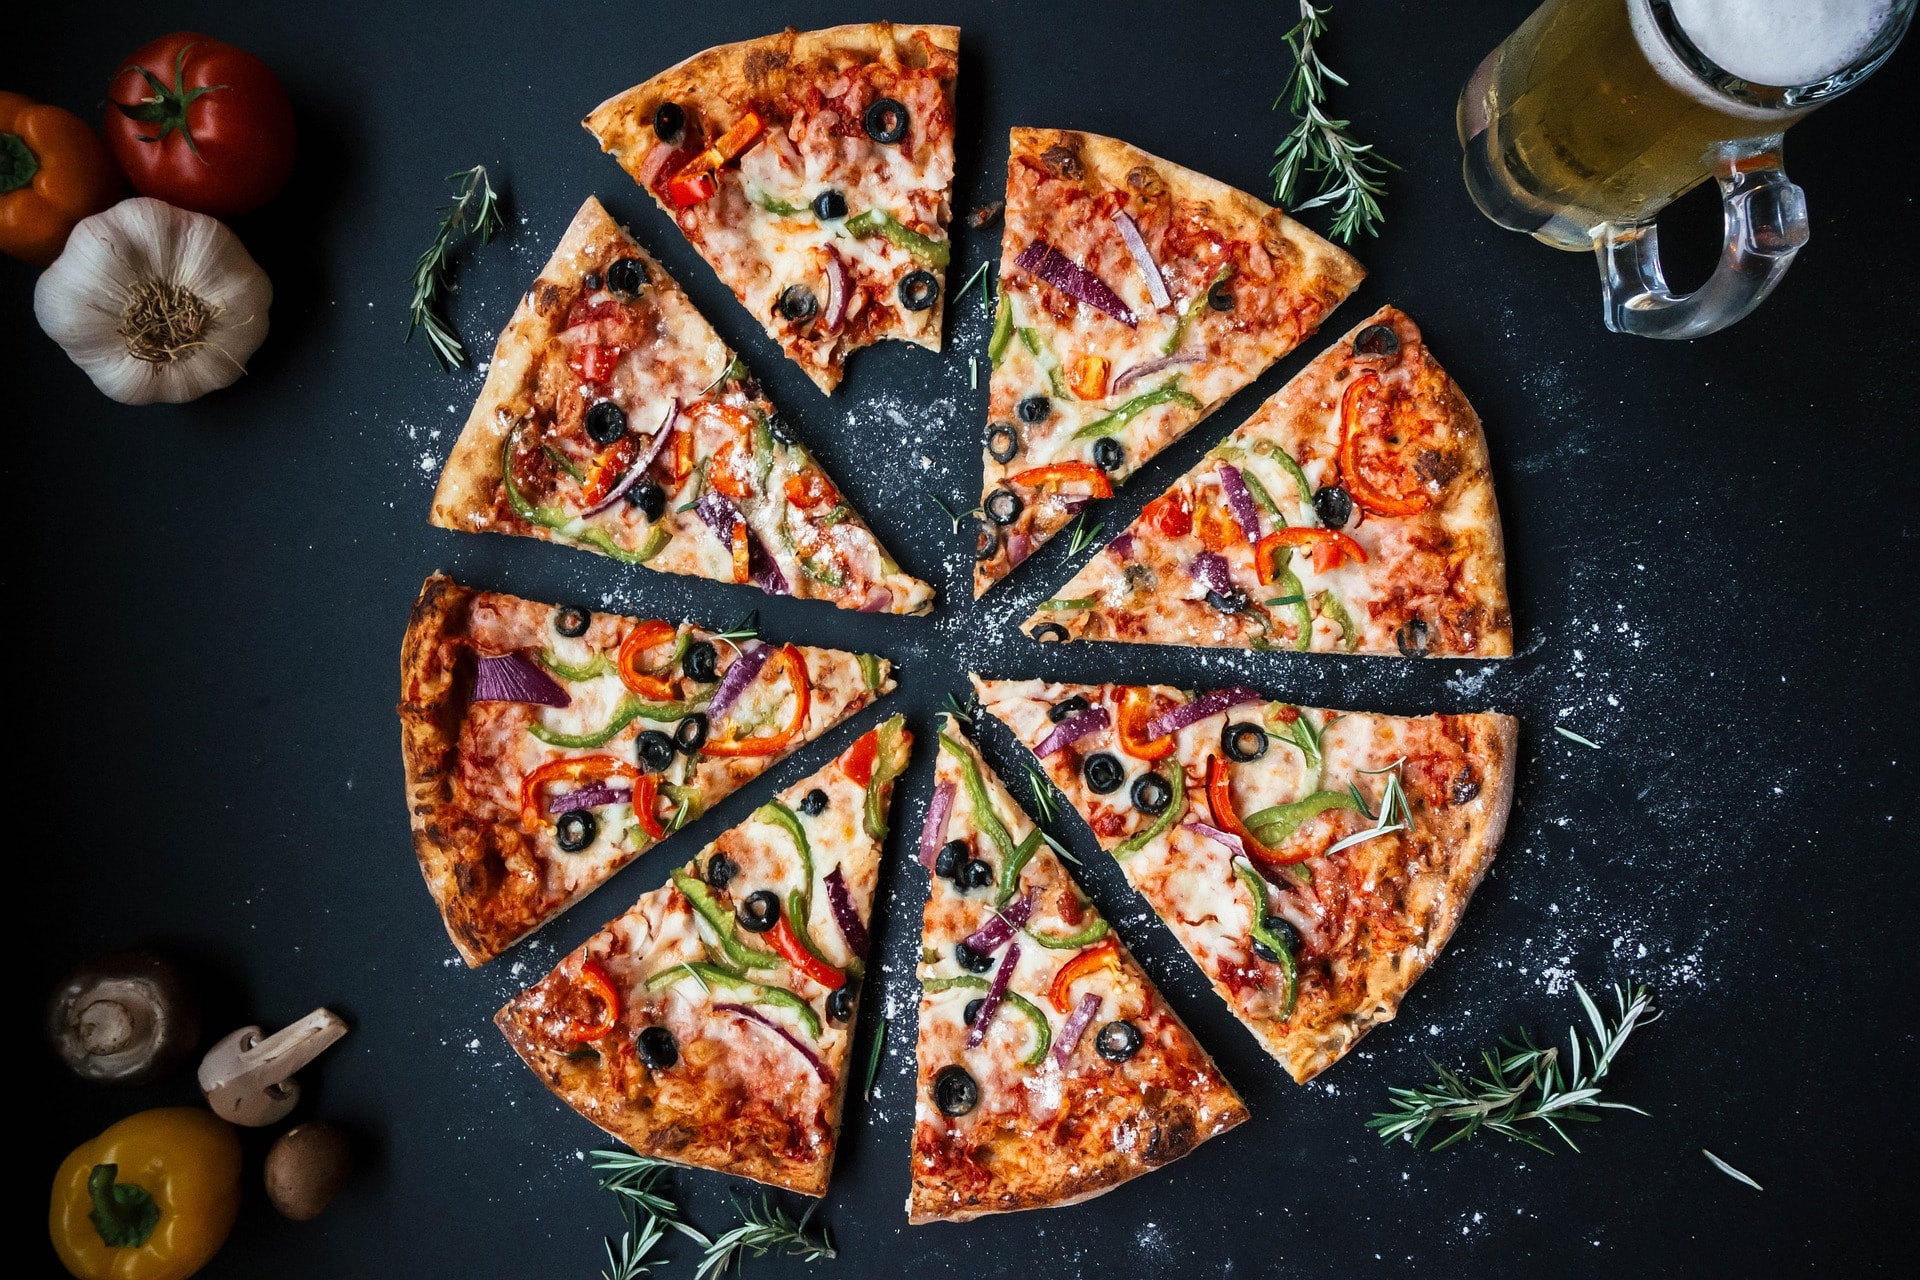 Tackle Today: Wanna make money? Go for Pizza. (Image by Igor Ovsyannykov from Pixabay)